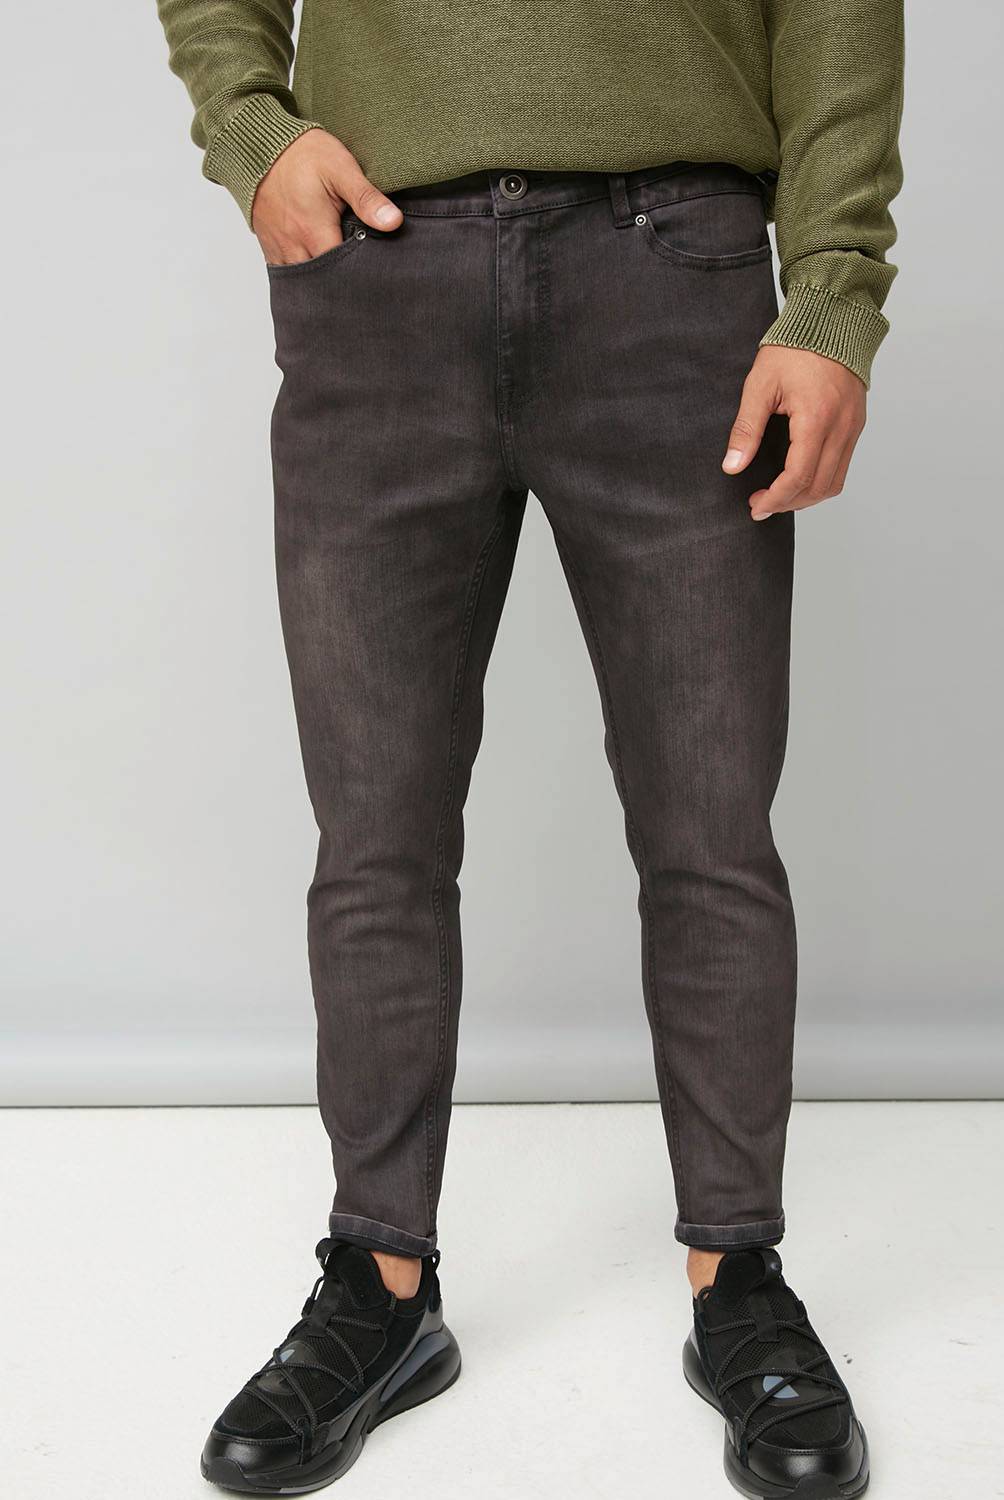 MOSSIMO - Jeans Super Skinny Fit Hombre